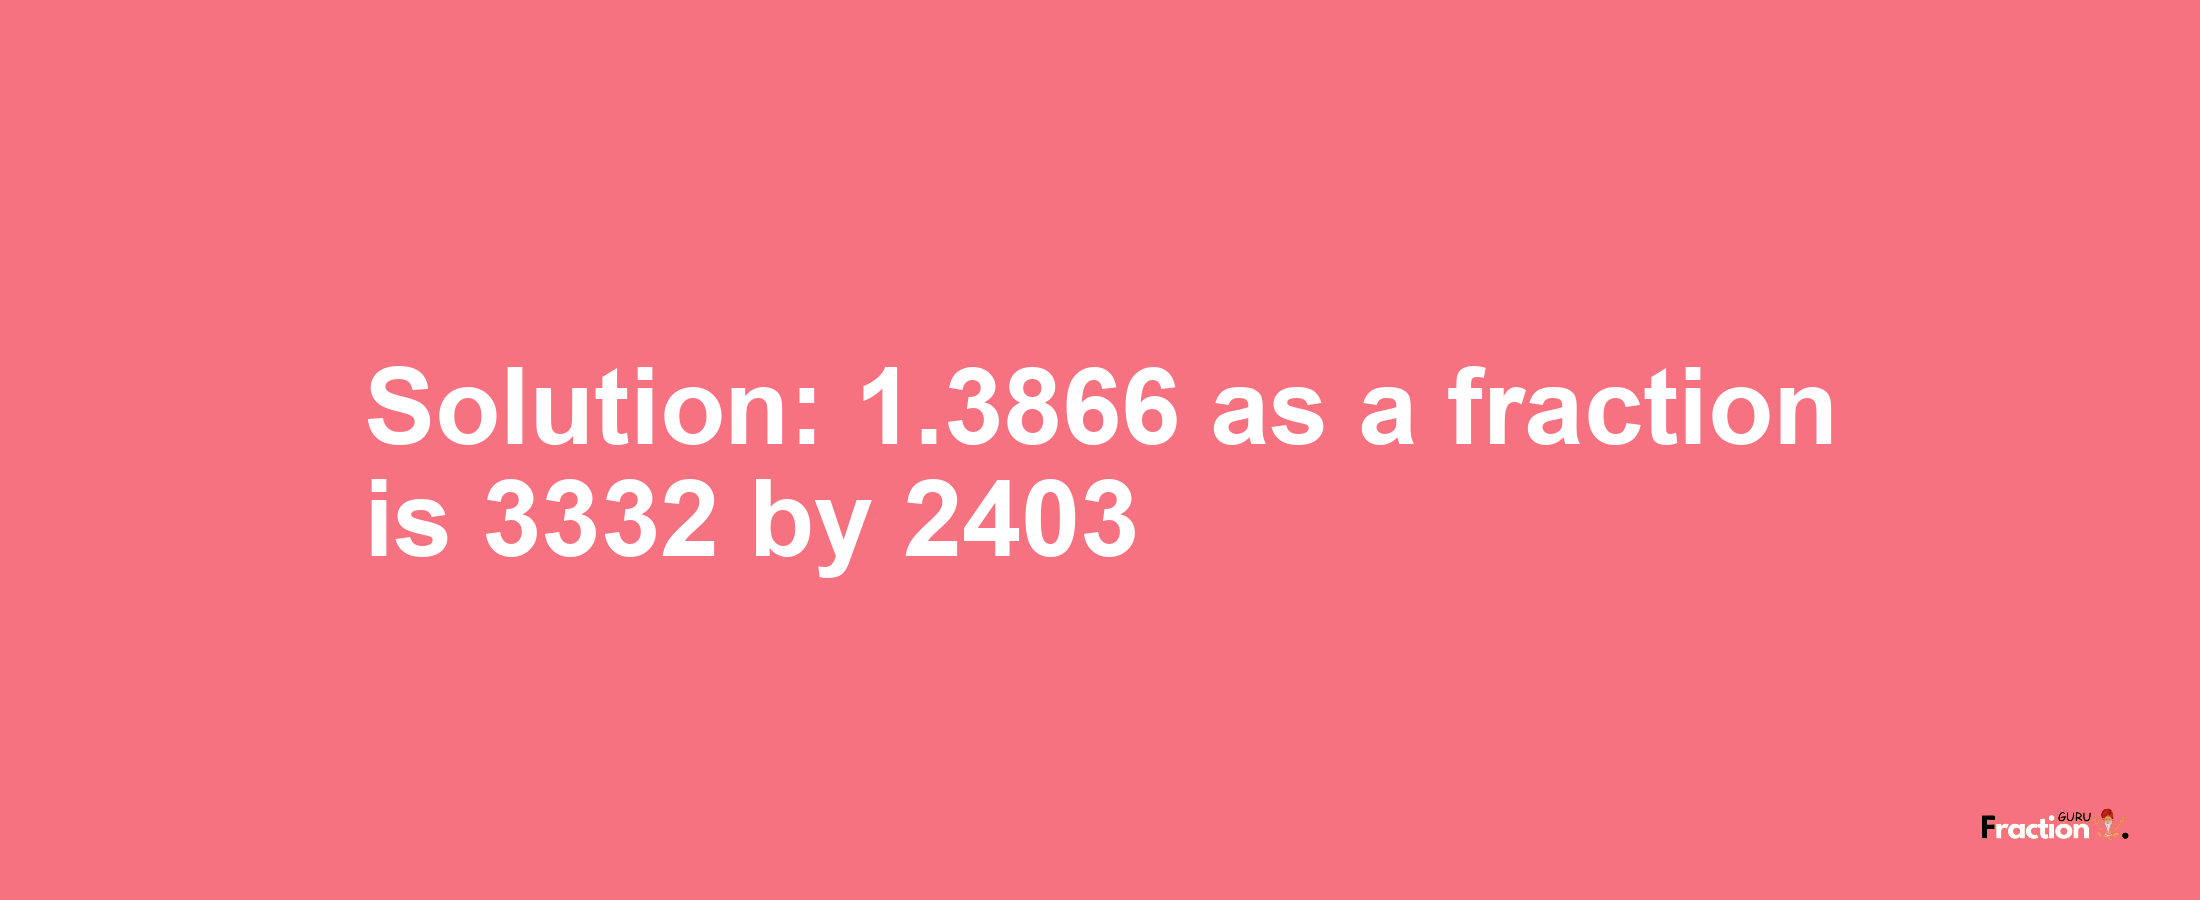 Solution:1.3866 as a fraction is 3332/2403